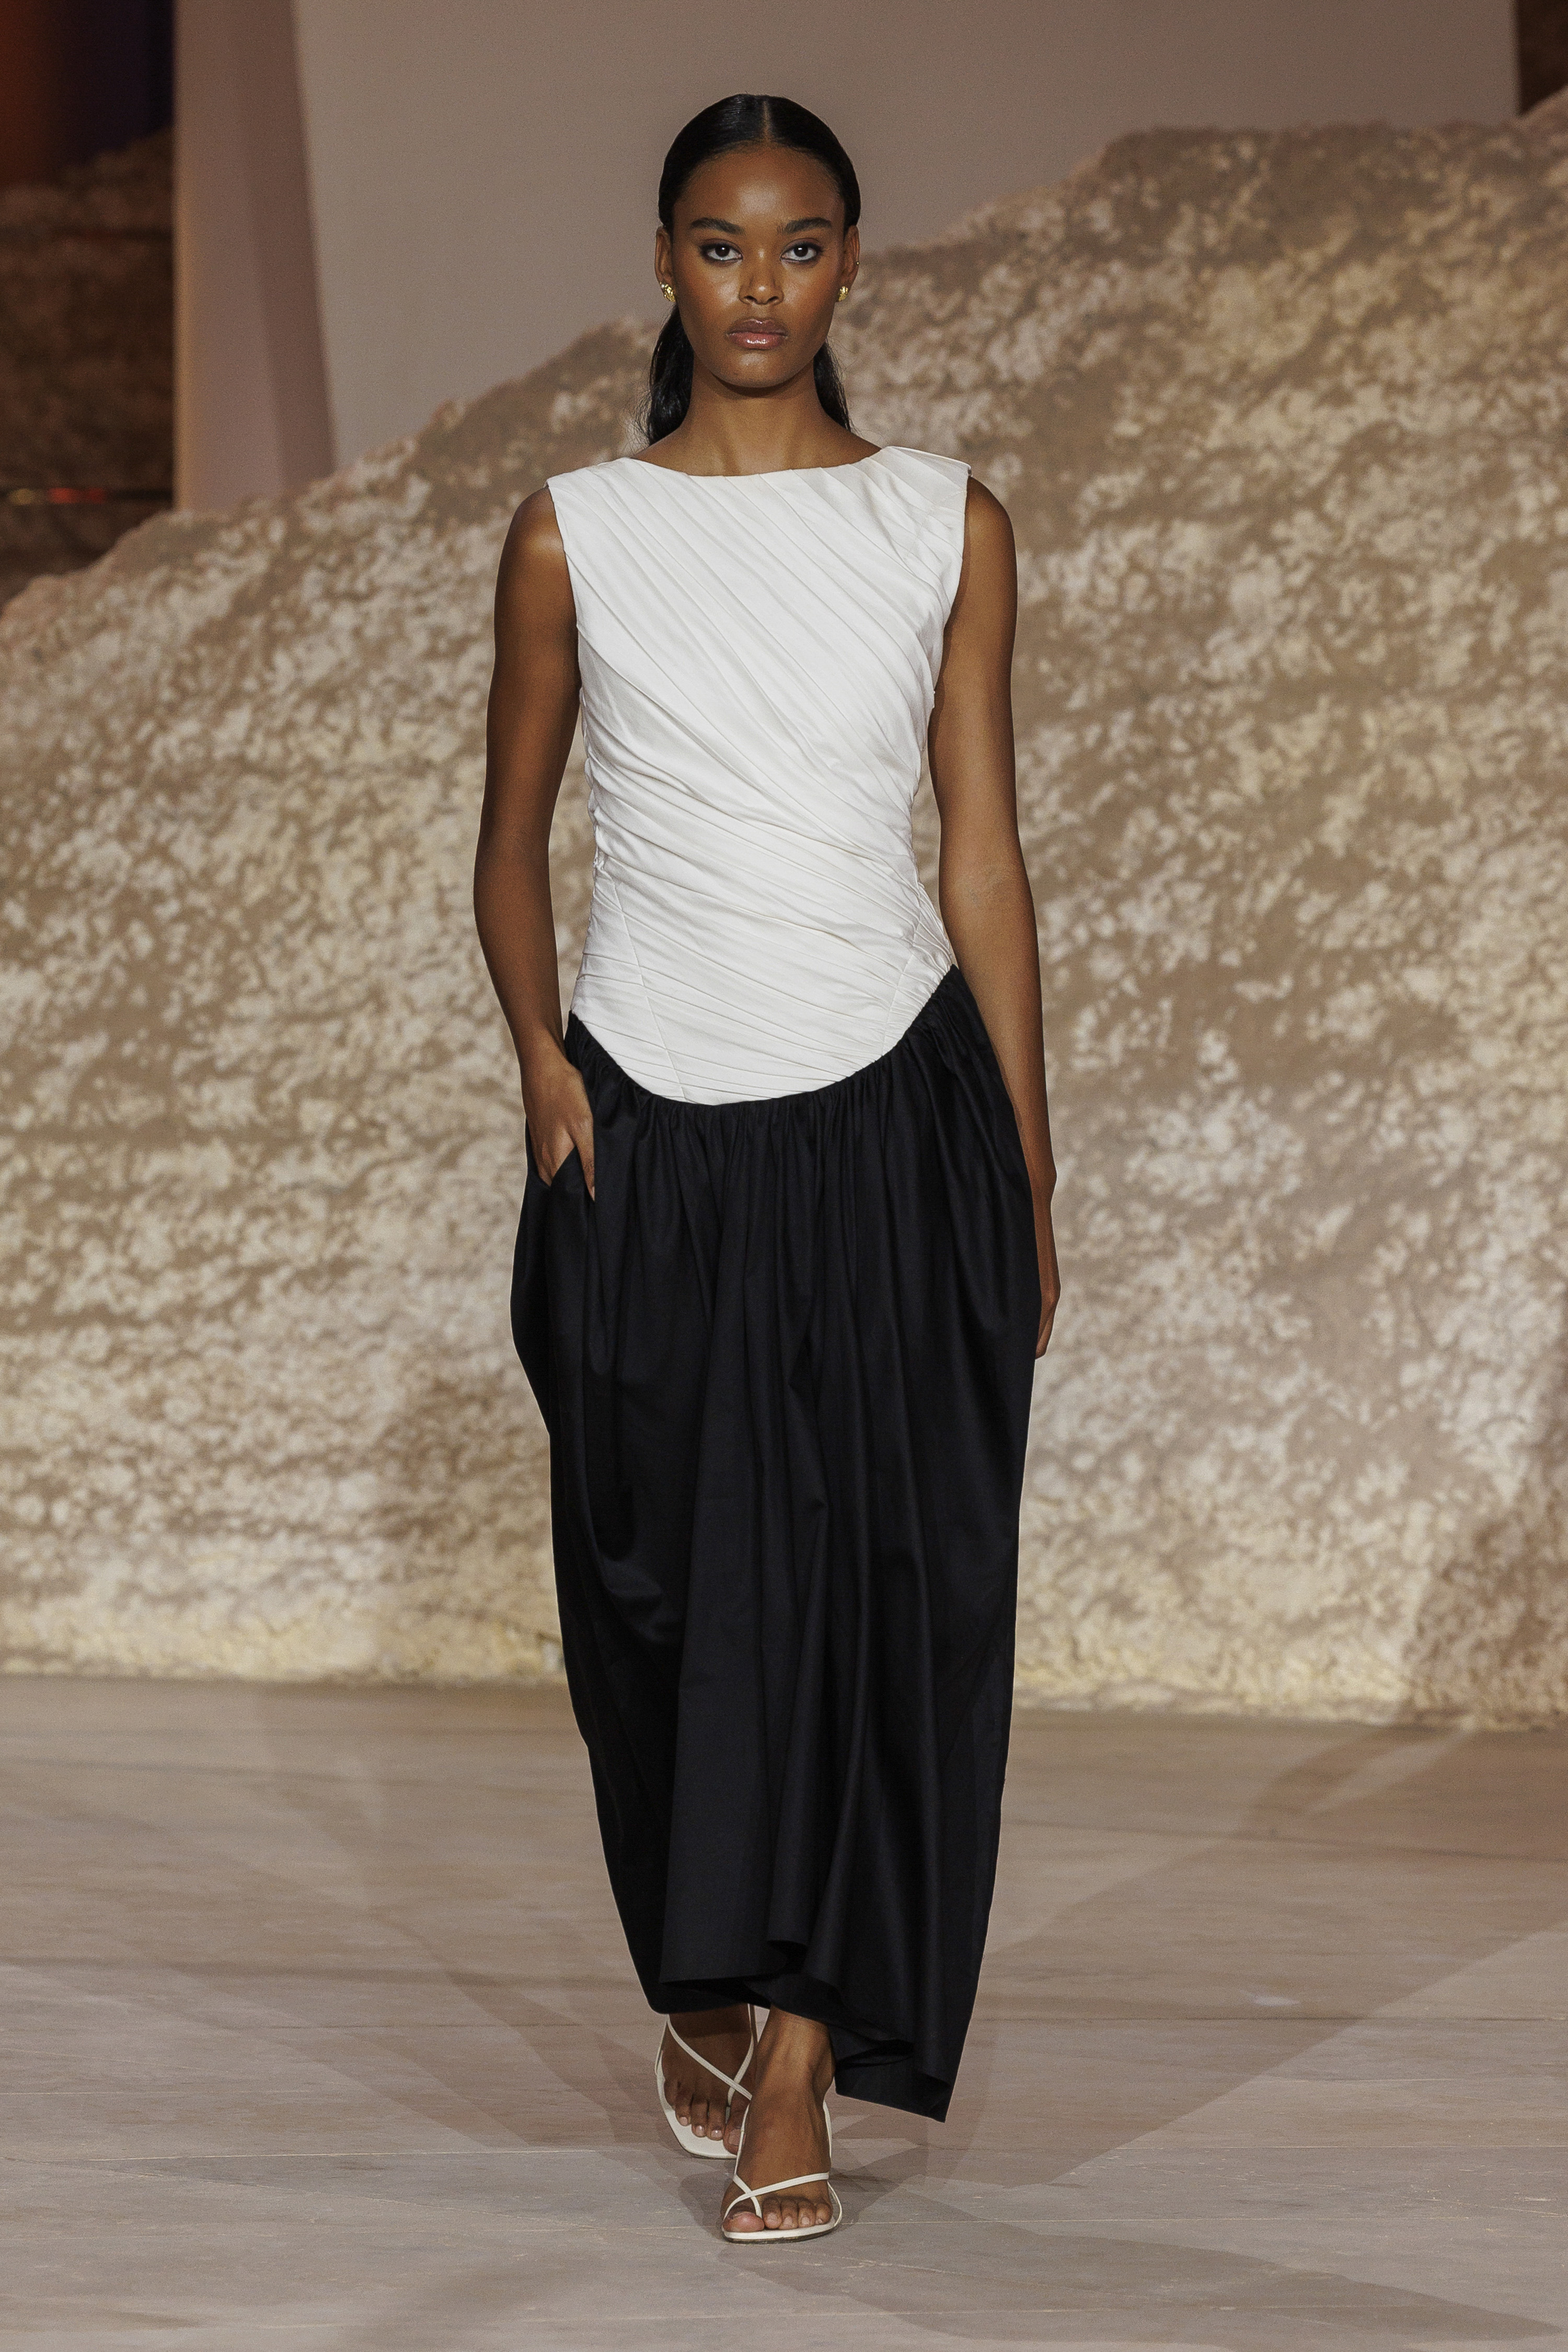 A model wears a white and black maxi dress on the Abadia runway